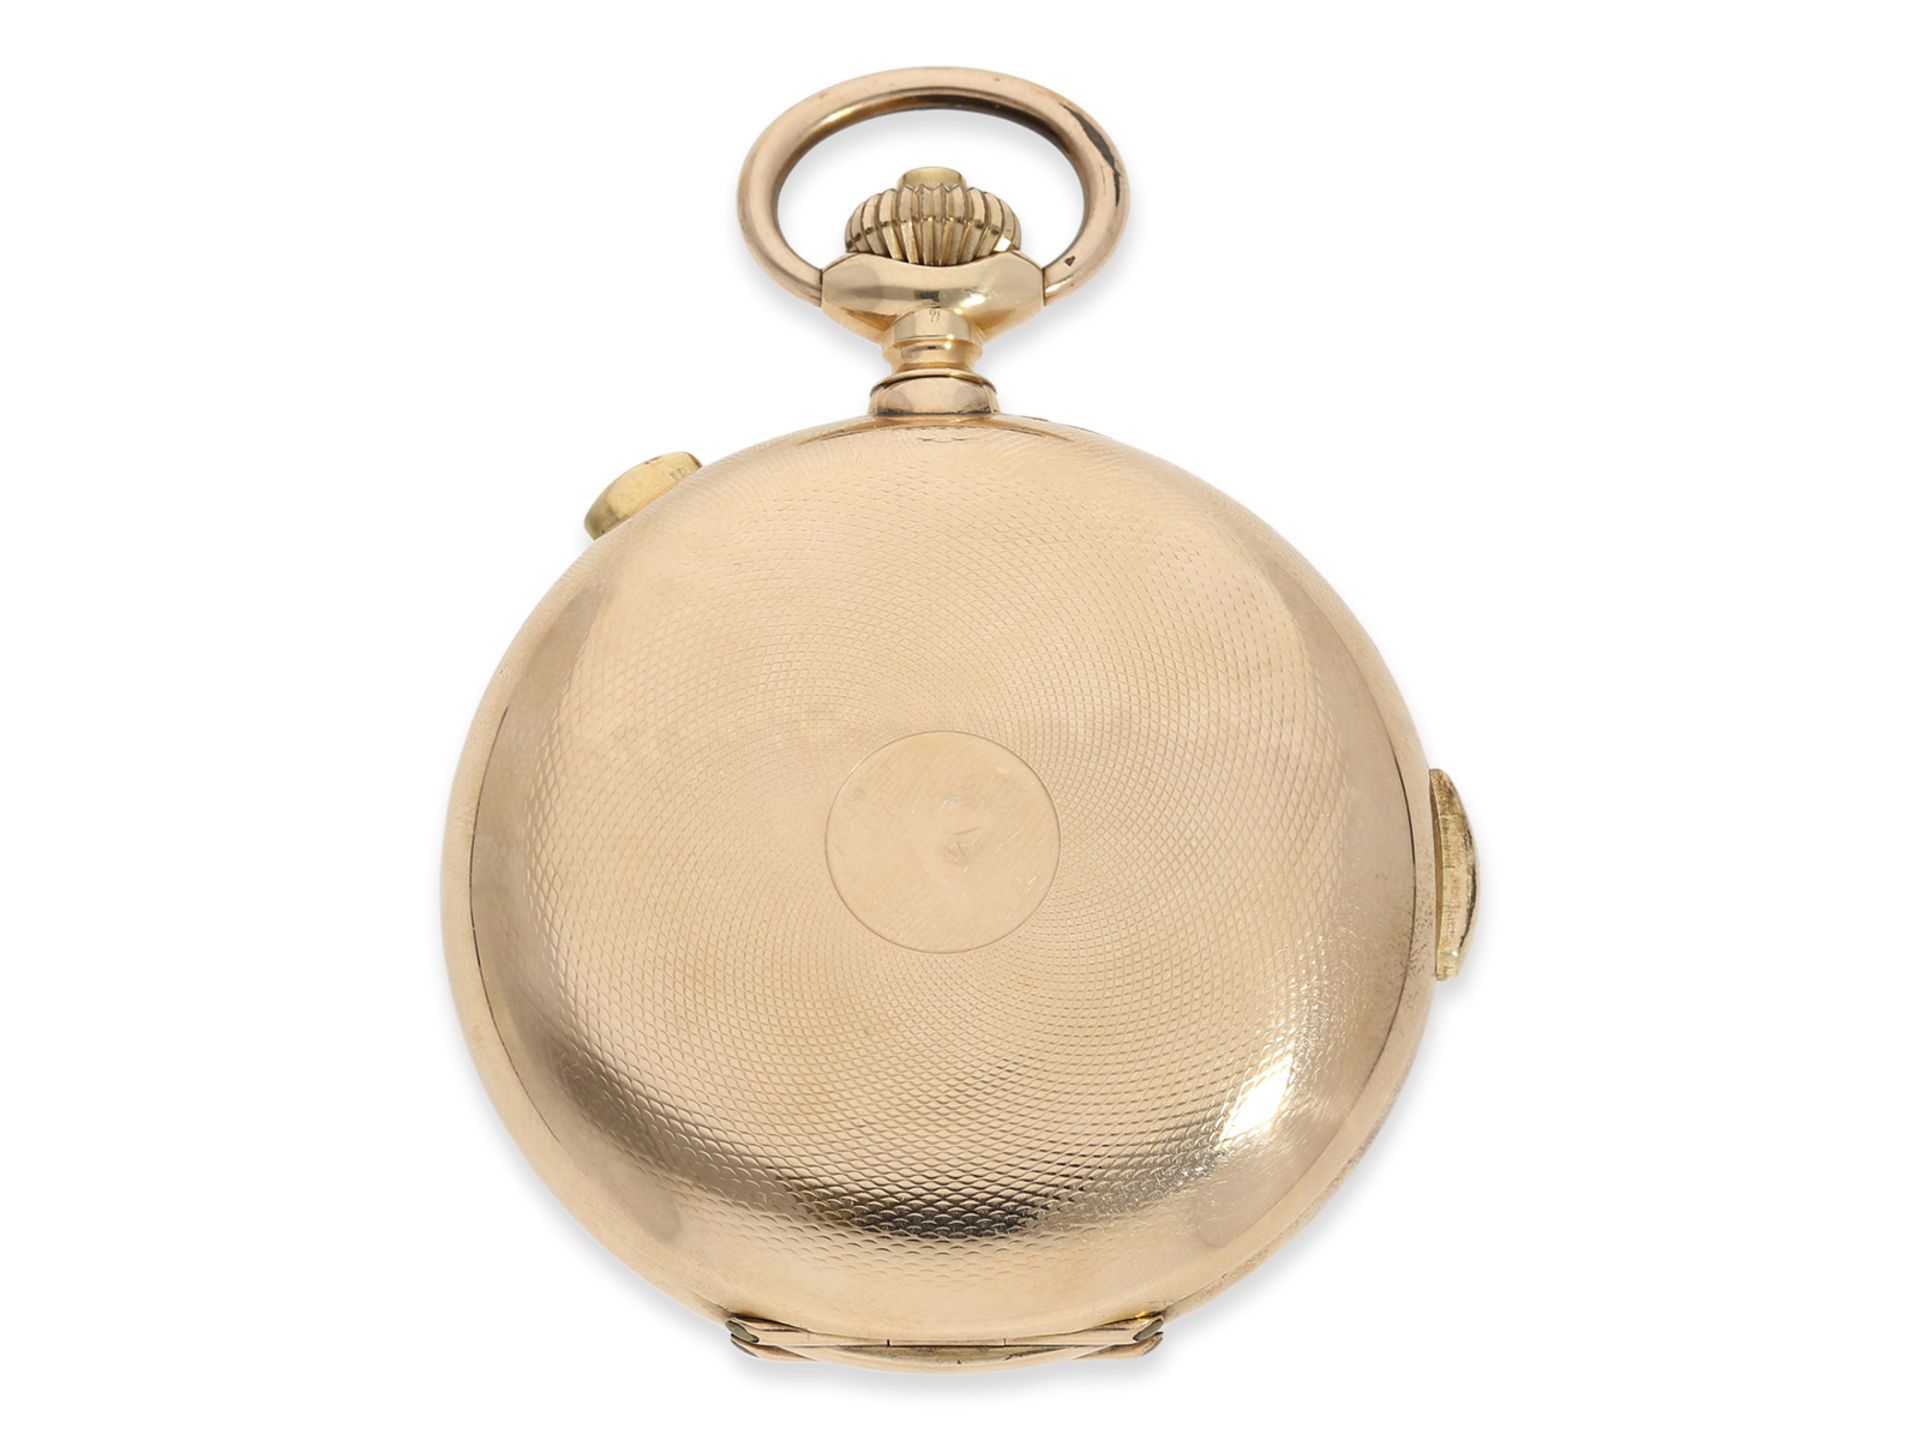 Pocket watch: impressive gold hunting case watch with repeater and chronograph, Audemars Freres Gene - Image 8 of 8